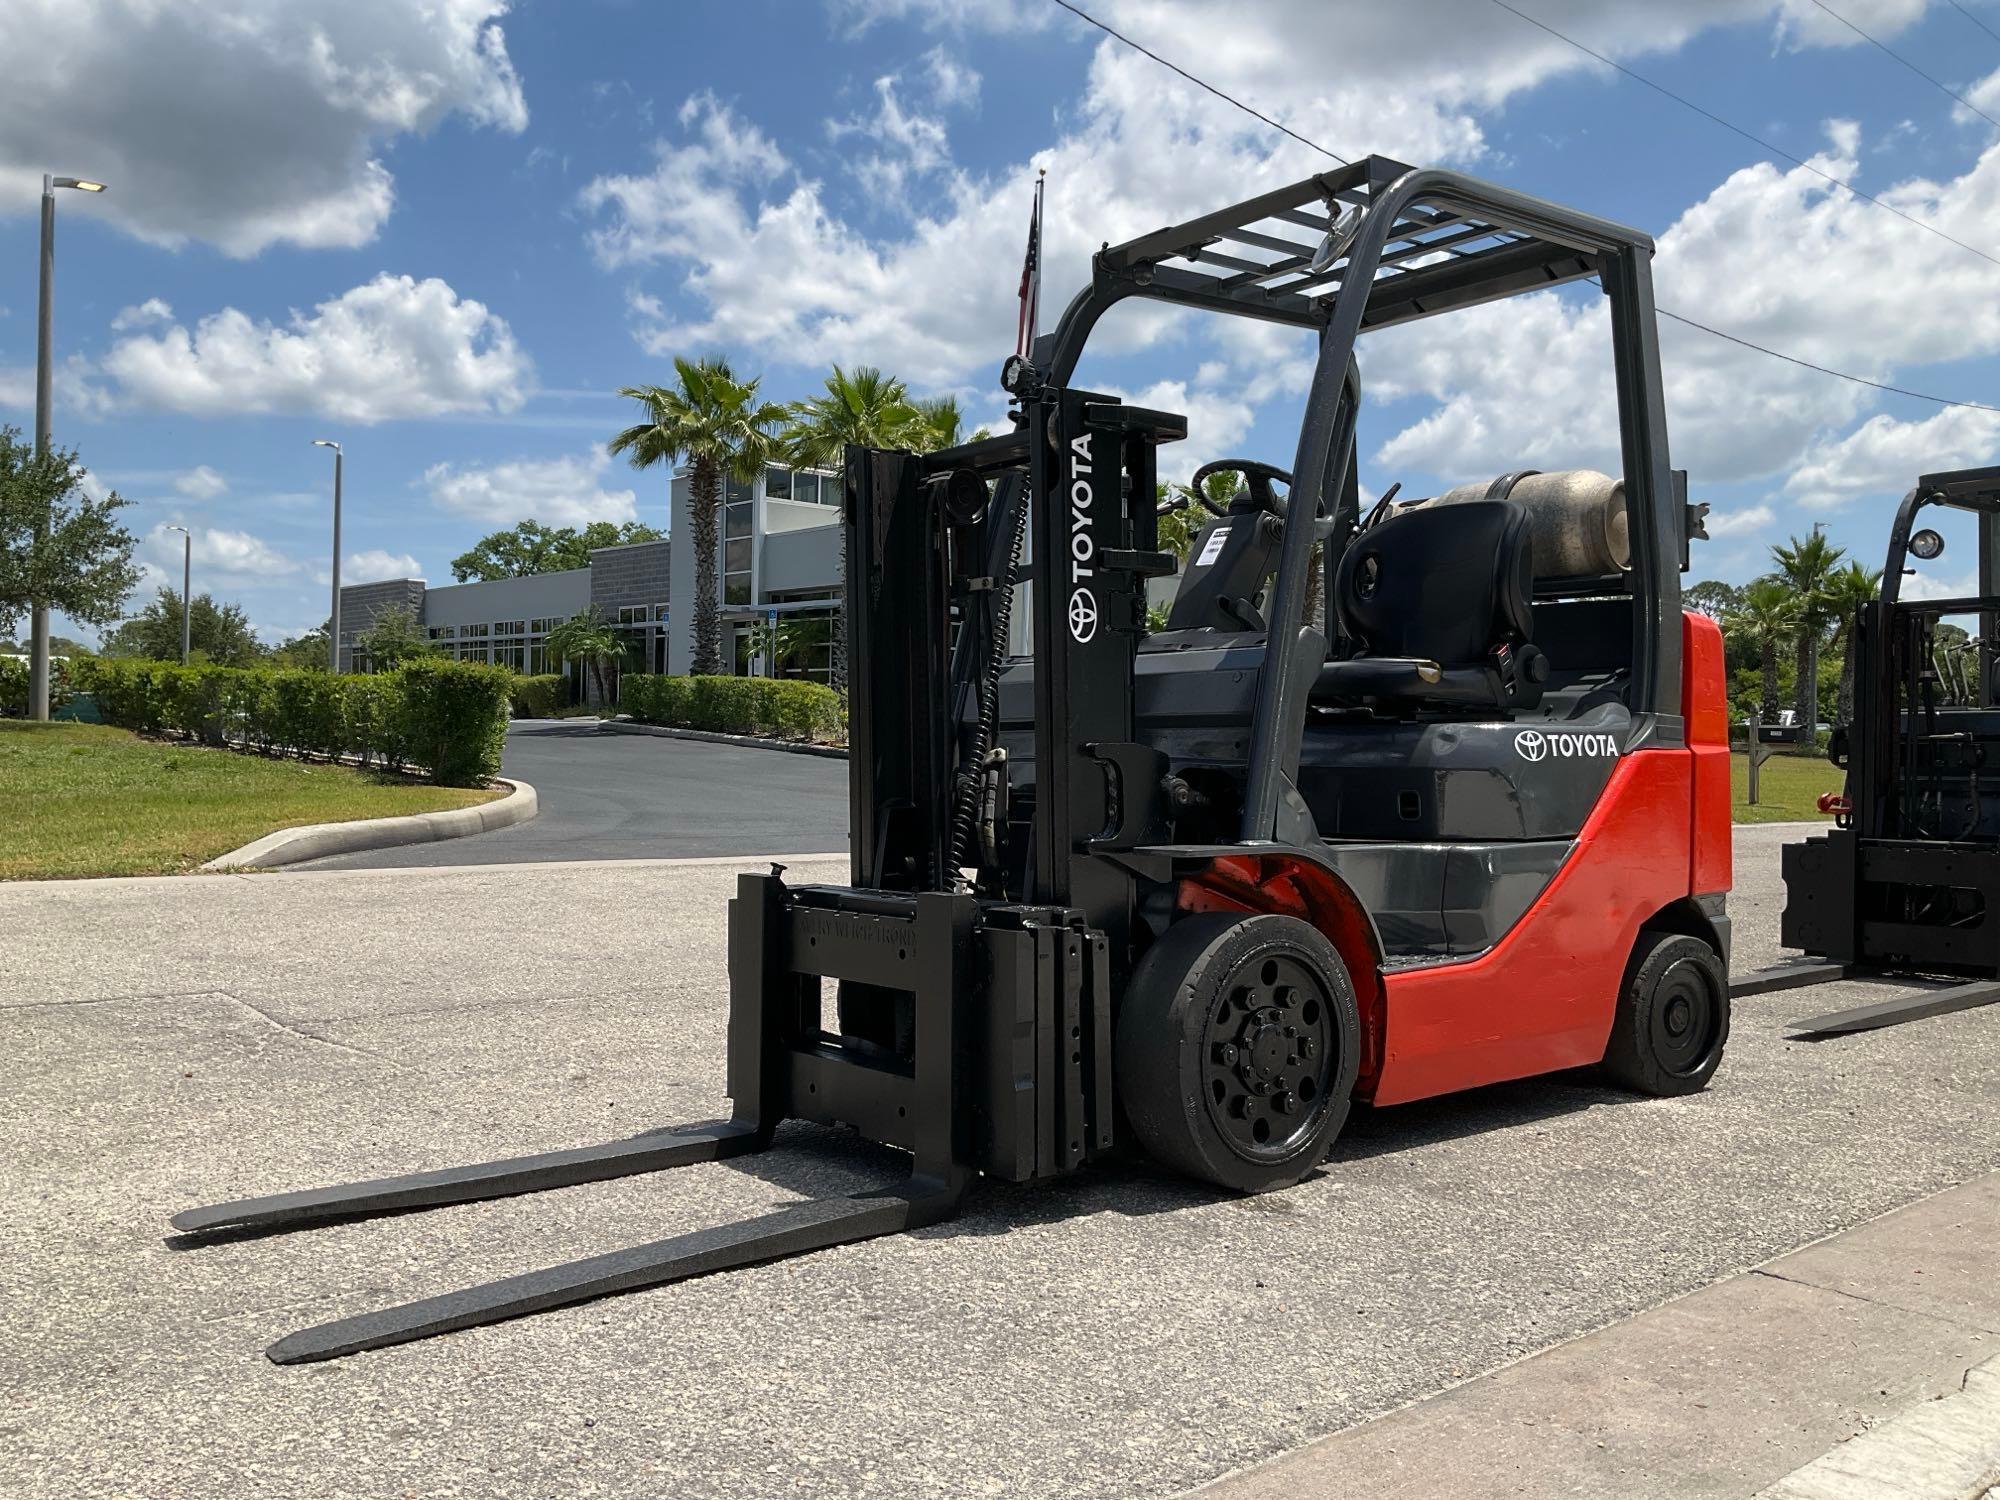 TOYOTA FORKLIFT MODEL 8FGCU25, LP POWERED, APPROX MAX CAPACITY 4700, MAX HEIGHT 80in, TILT, SIDE